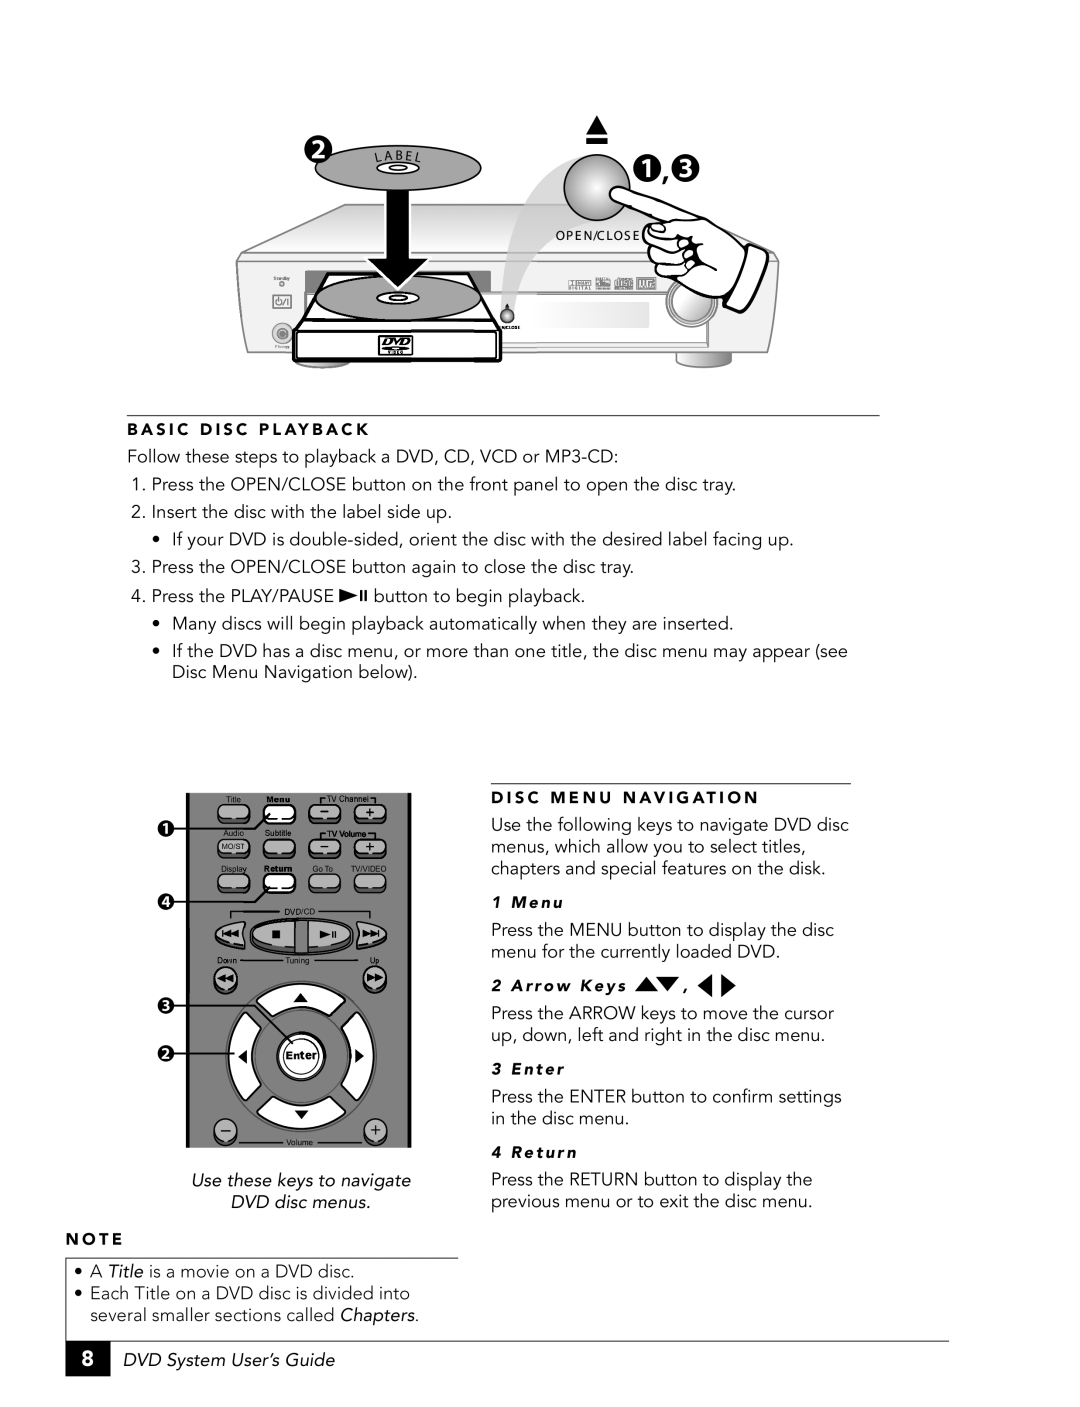 GoVideo DHT7100 manual Use these keys to navigate DVD disc menus, DVD System User’s Guide 